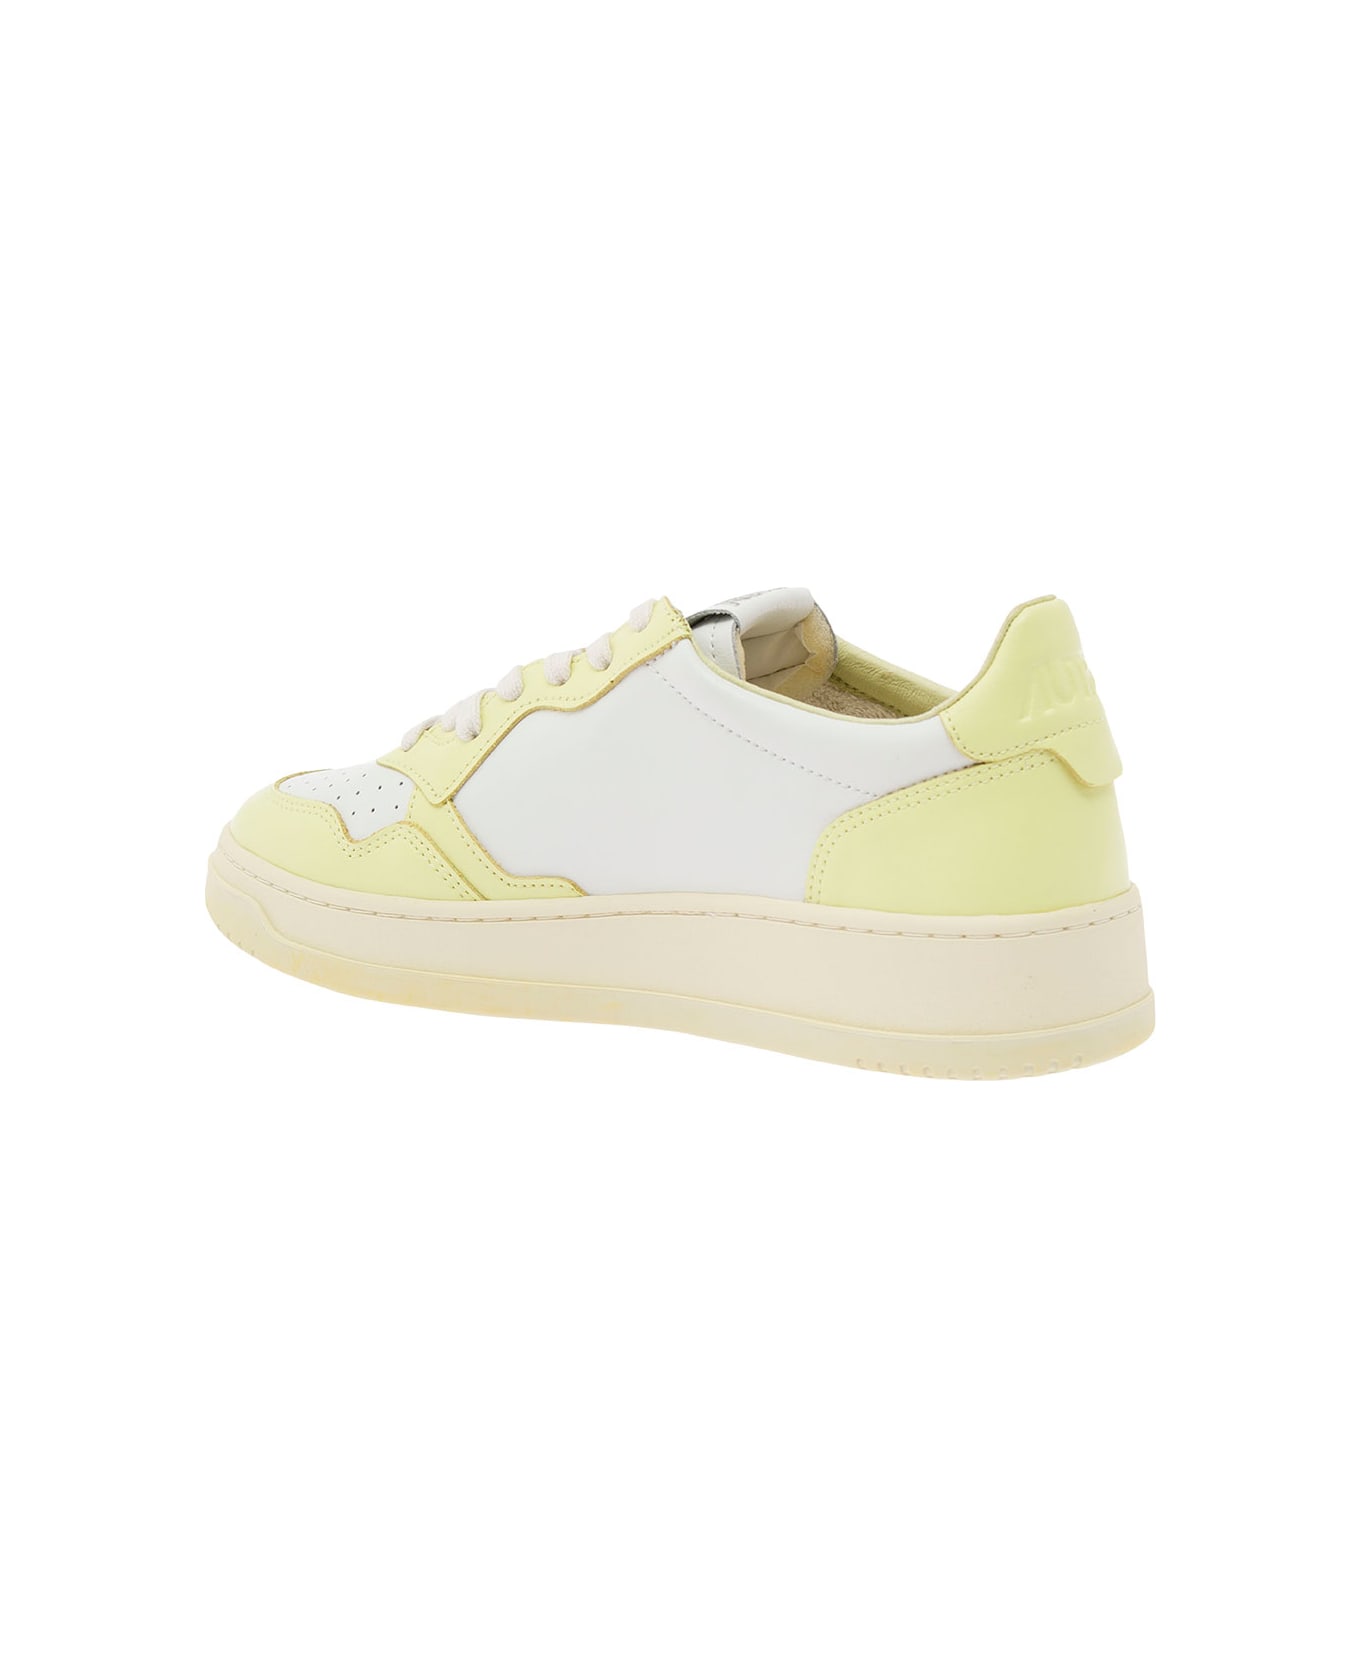 Autry 'medalist' White And Yellow Low Top Sneakers With Logo Detail In Leather Man - Yellow スニーカー